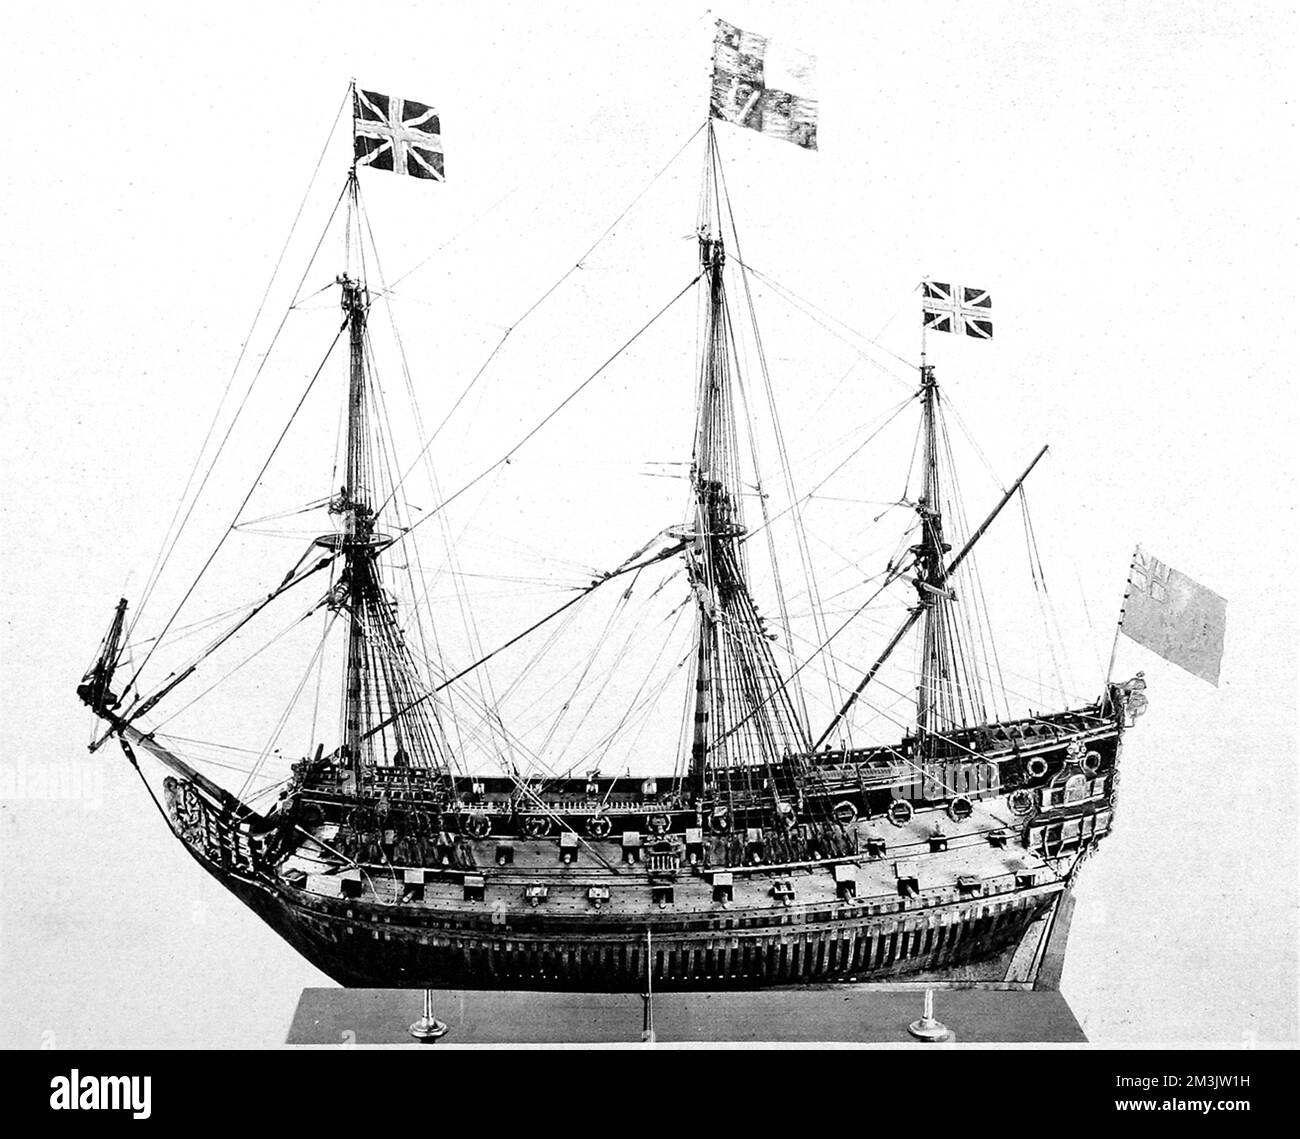 Photograph of a model of an 80-gun ship of Charles the Second's Navy, of about 1680. The model, made of boxwood and walnut, was 53 inches long and was being offered for sale in 1929 by J.M. Botibol of Hanway Street. The flags on the mast-heads and stern were contemporary to 1929, rather than 1680.  1929 Stock Photo